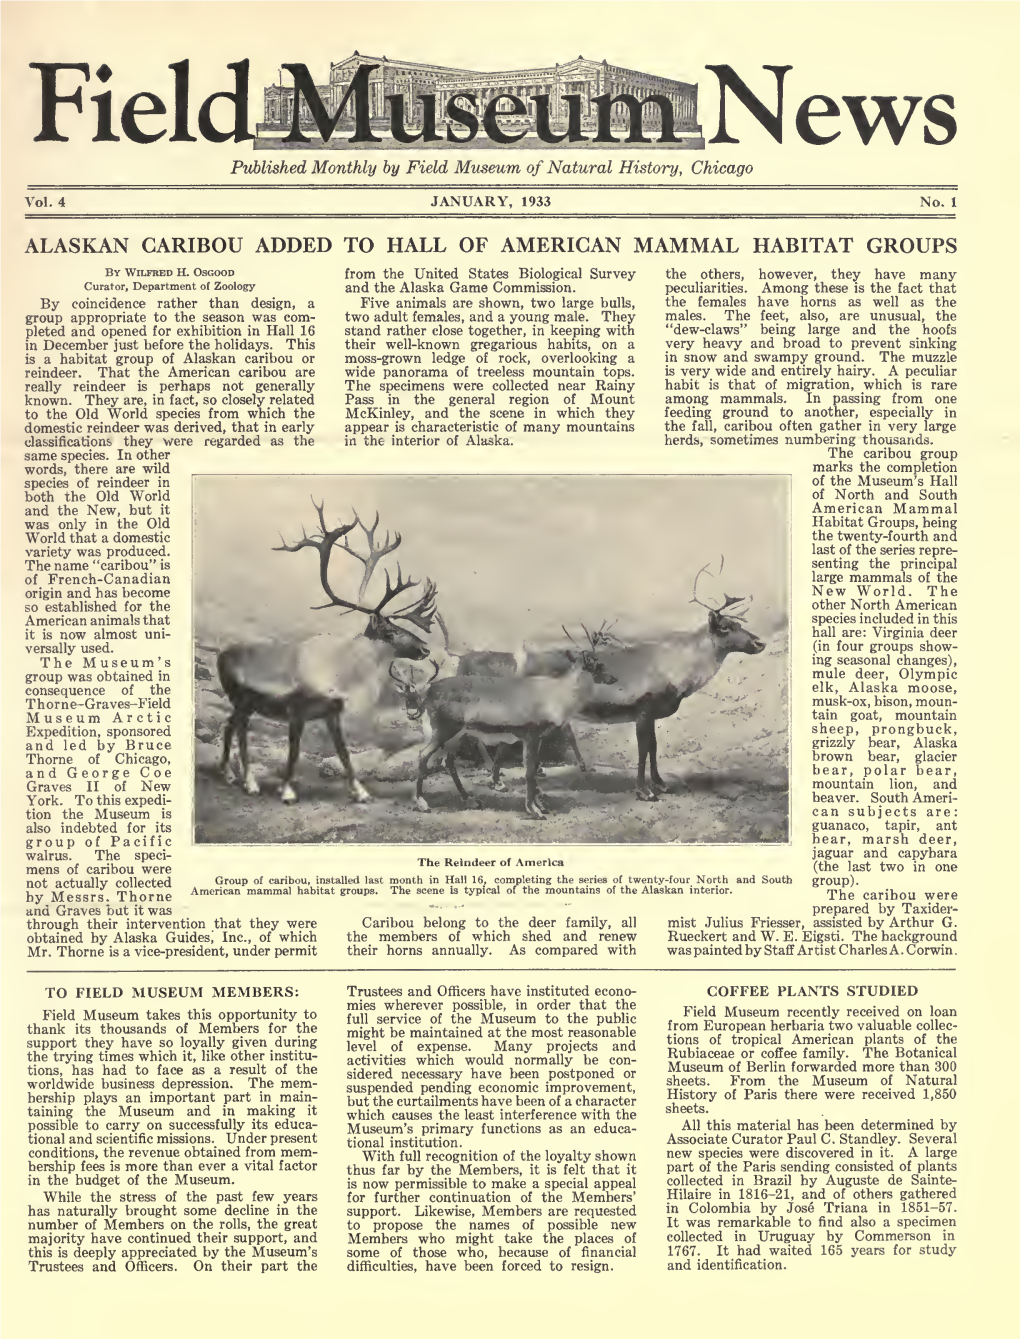 ALASKAN CARIBOU ADDED to HALL of AMERICAN MAMMAL HABITAT GROUPS by Wilfred H